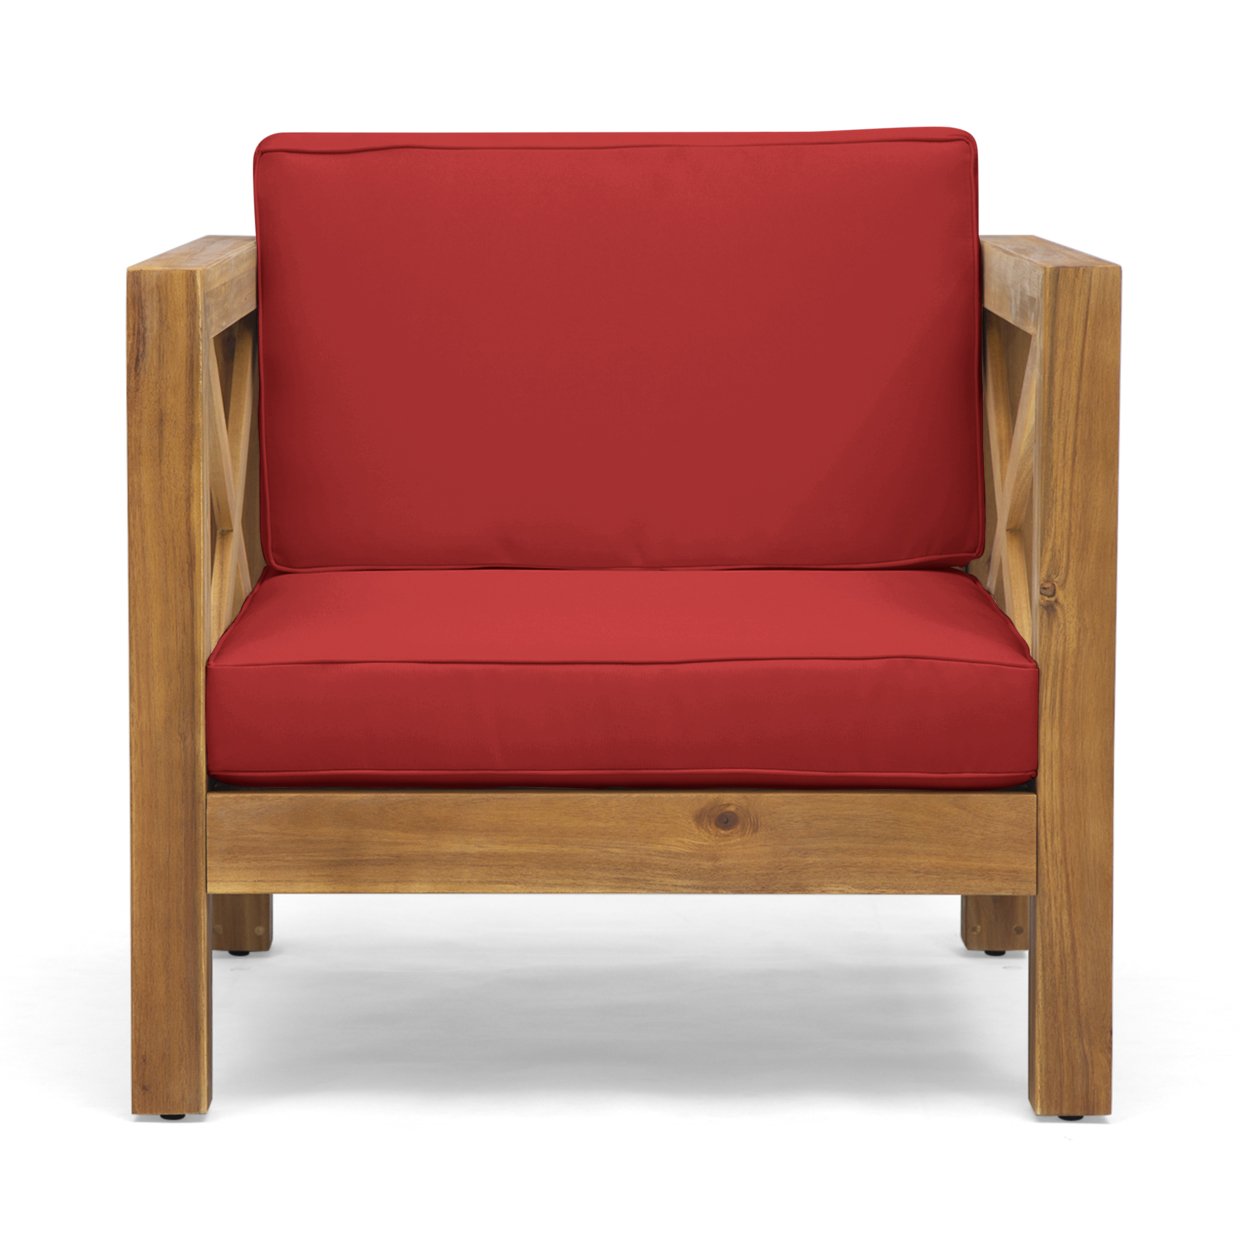 Indira Outdoor Acacia Wood Club Chair With Cushion - Teak Finish + Red